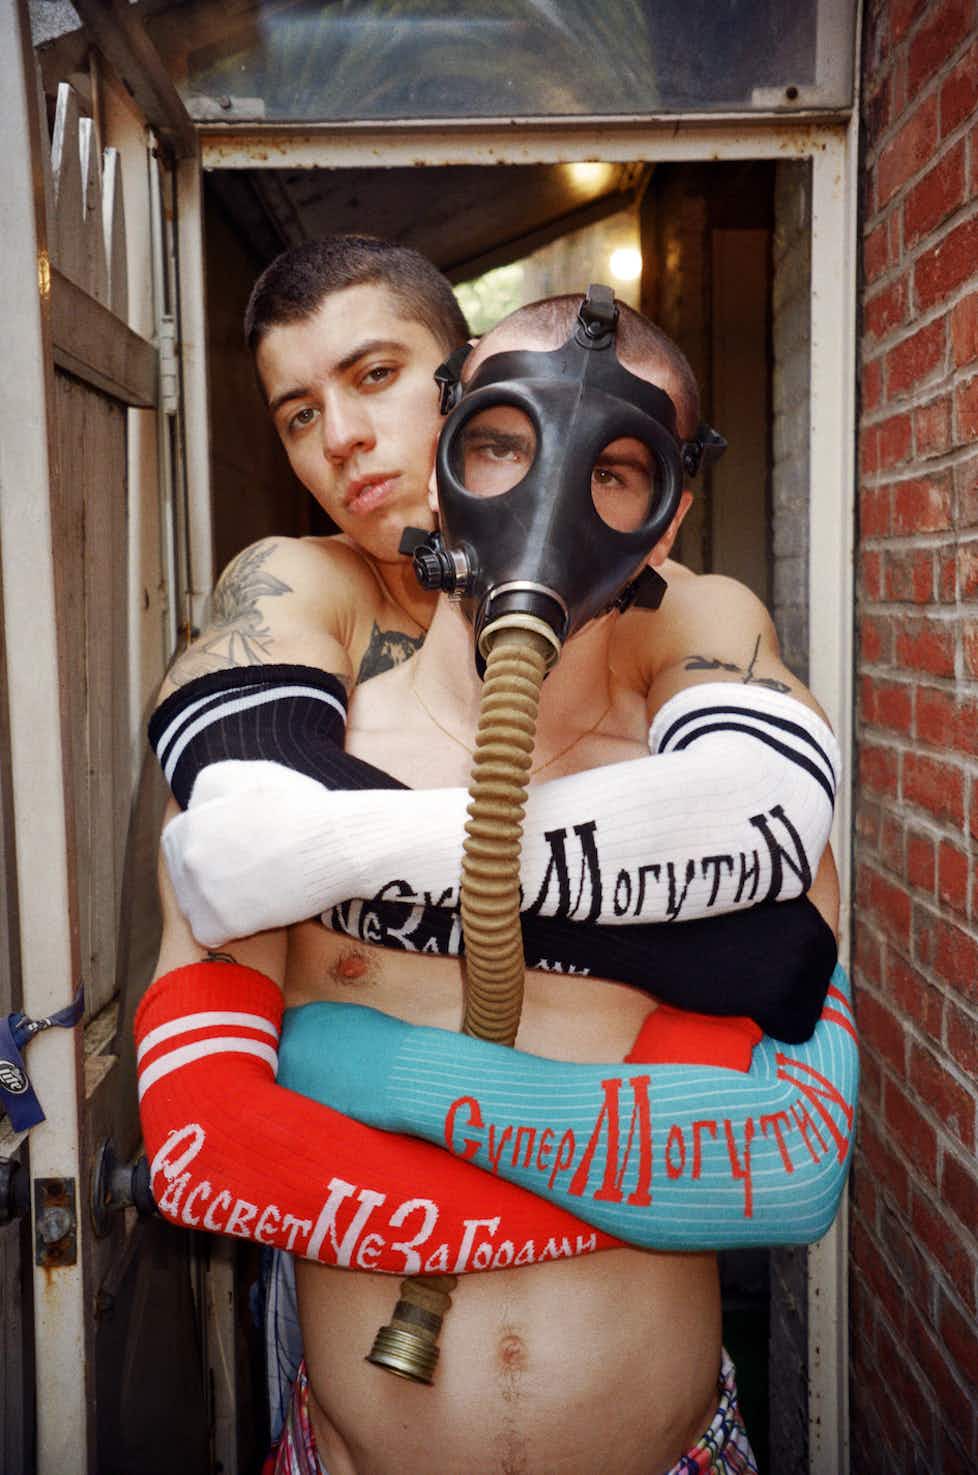 Photograph Erotic style with Nude muscular man wearing a gasmask